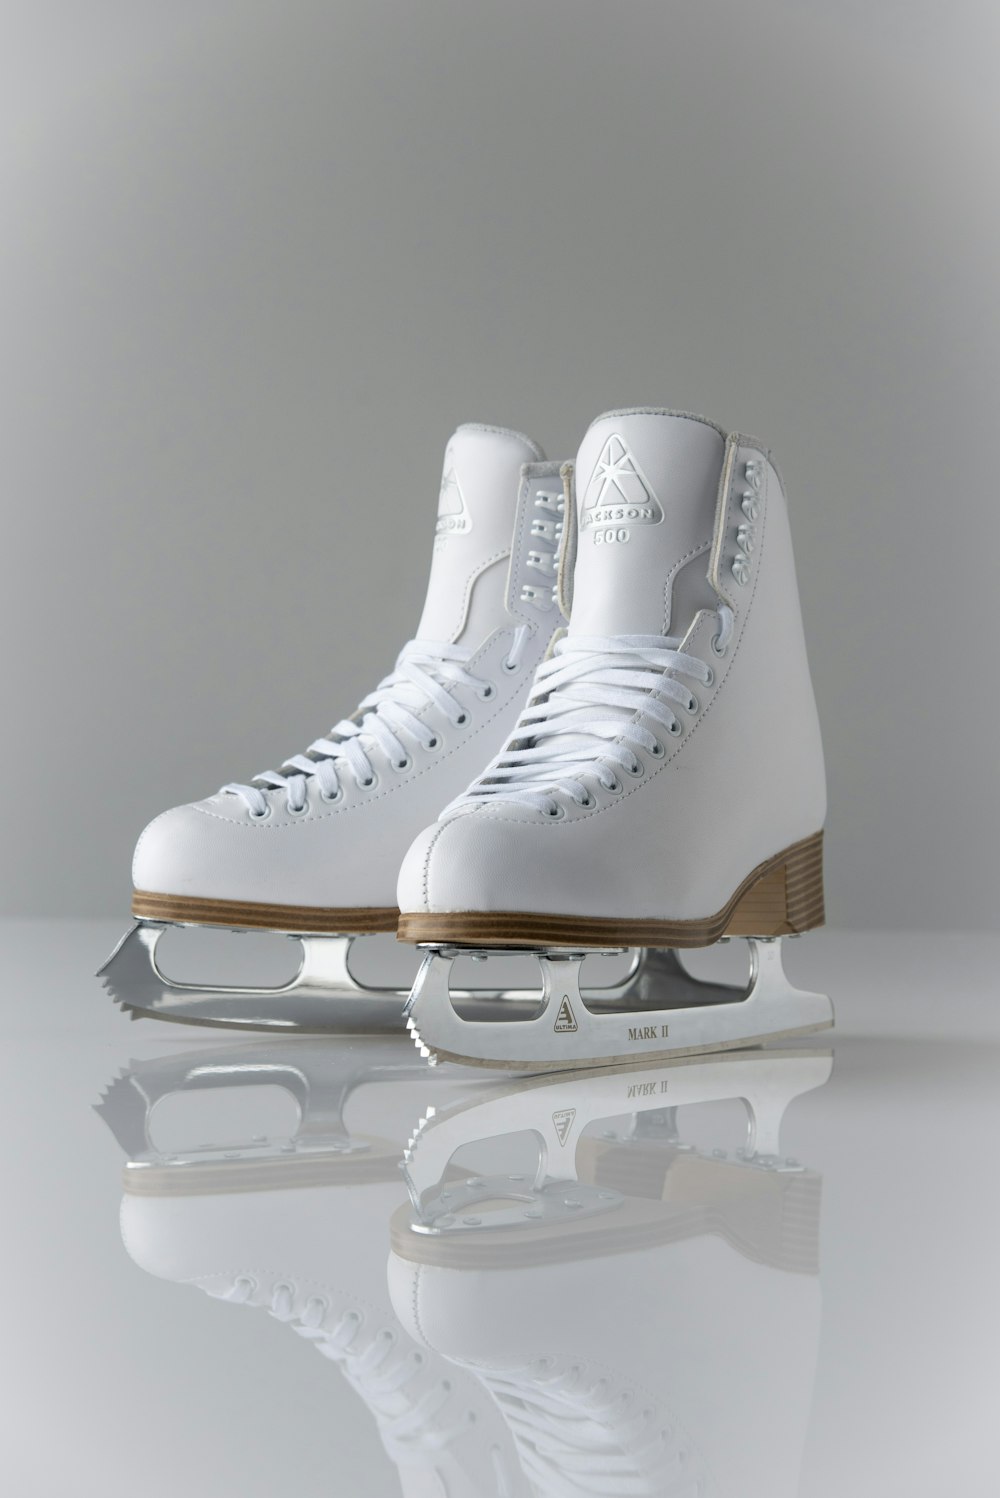 Ice Skate Pictures | Download Free Images on Unsplash